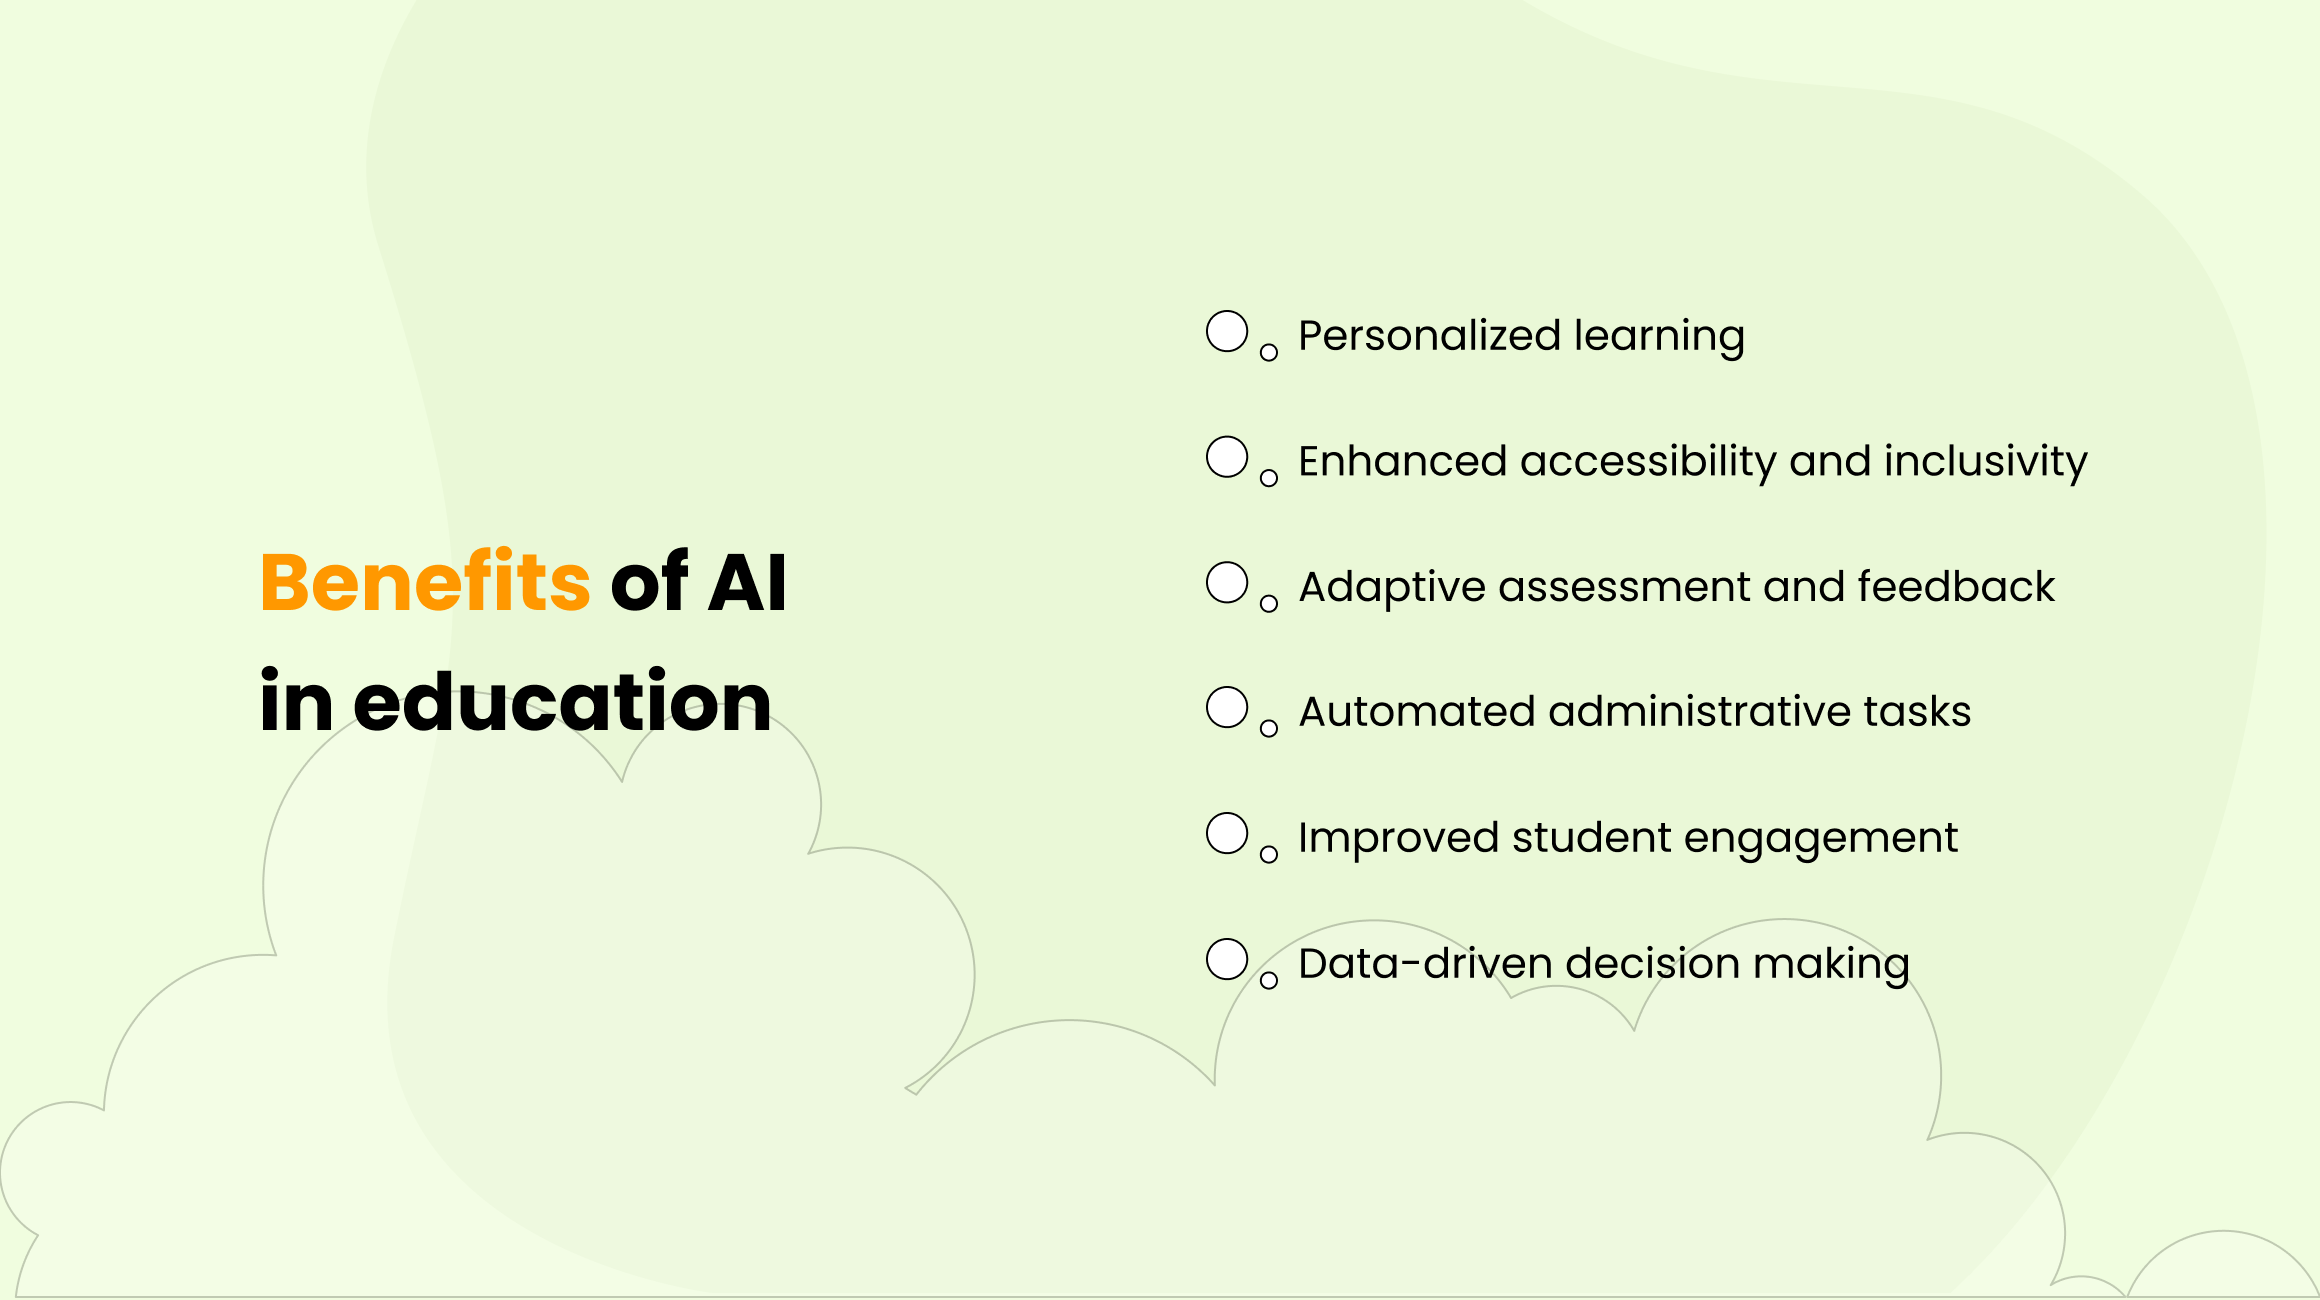 Benefits of AI in education